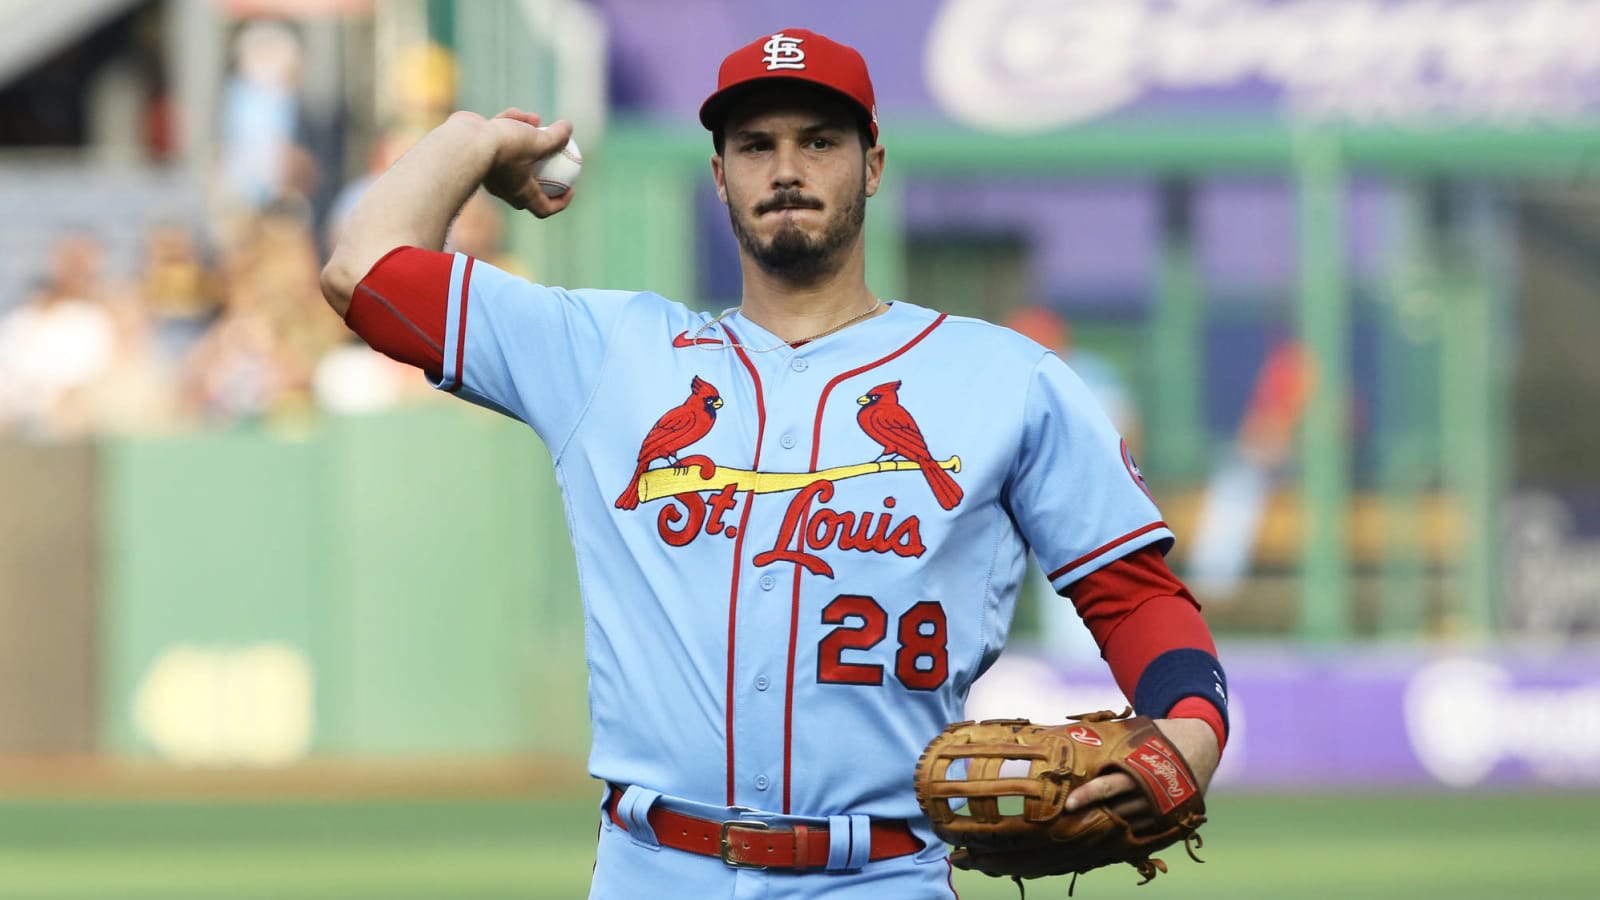 Over-under on Nolan Arenado acting like a toddler? Nolan Arenado is a  b***h - New York Mets fans hate St. Louis Cardinals 3rd baseman Nolan  Arenado and they're making it clear on